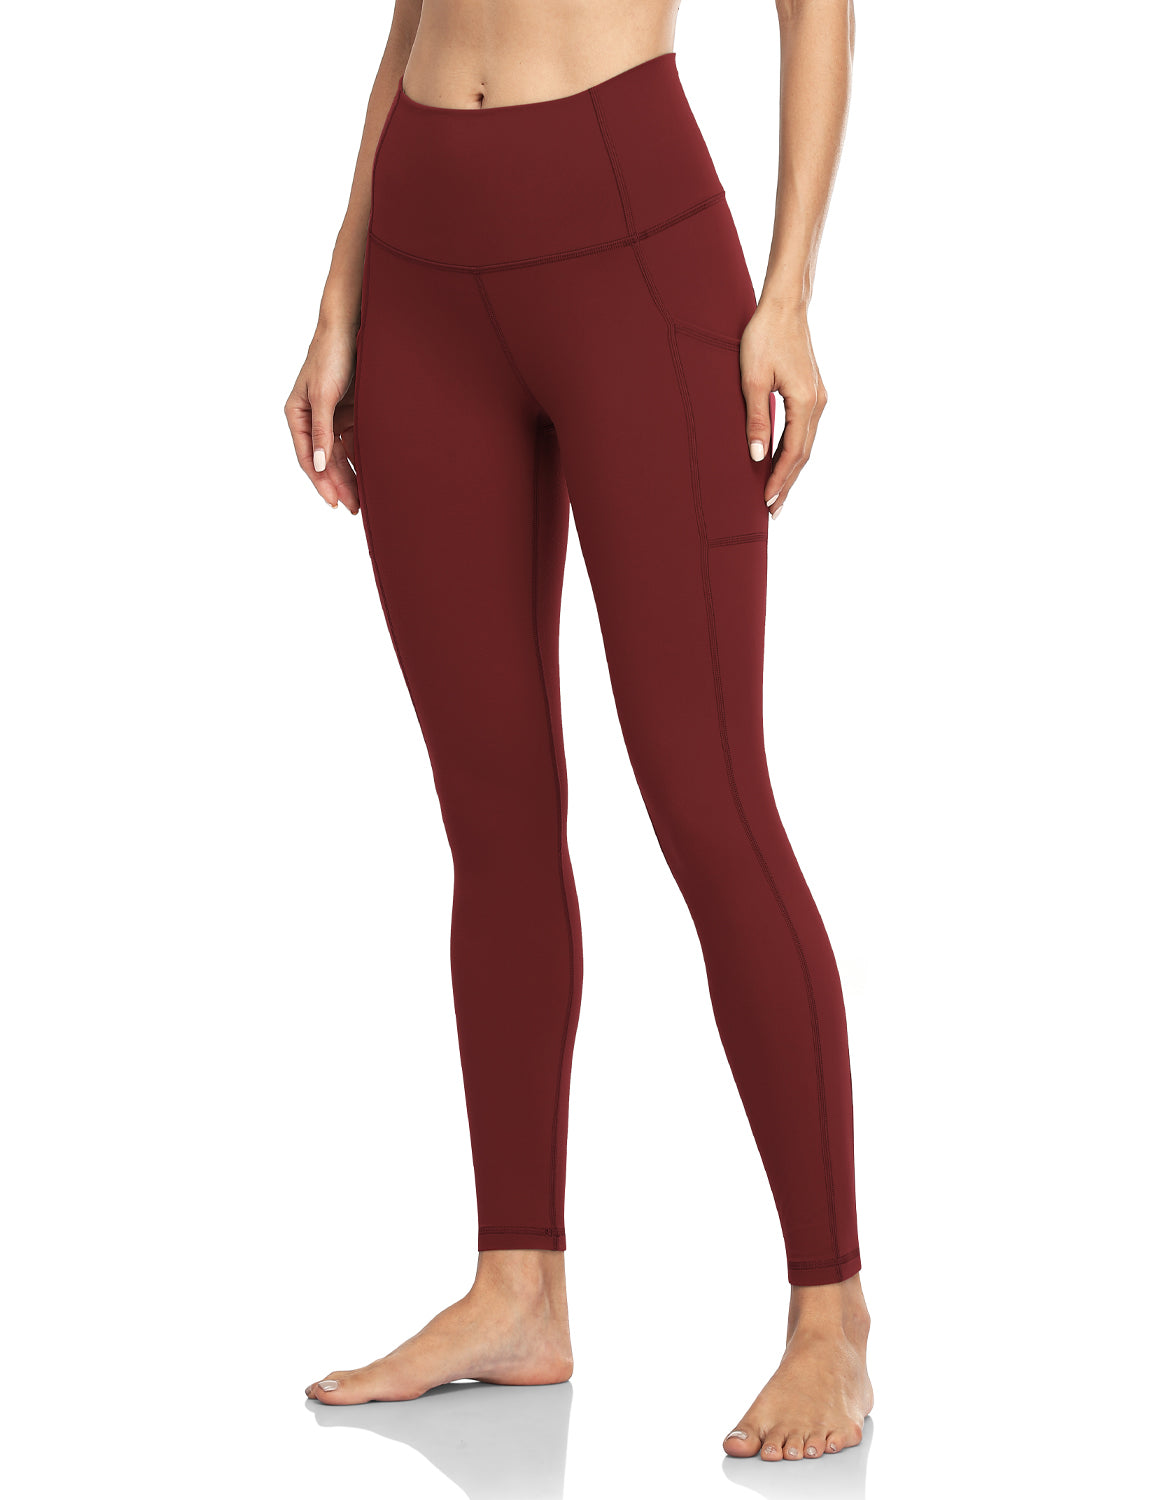 HeyNuts Essential High Waisted Leggings with Side Pockets